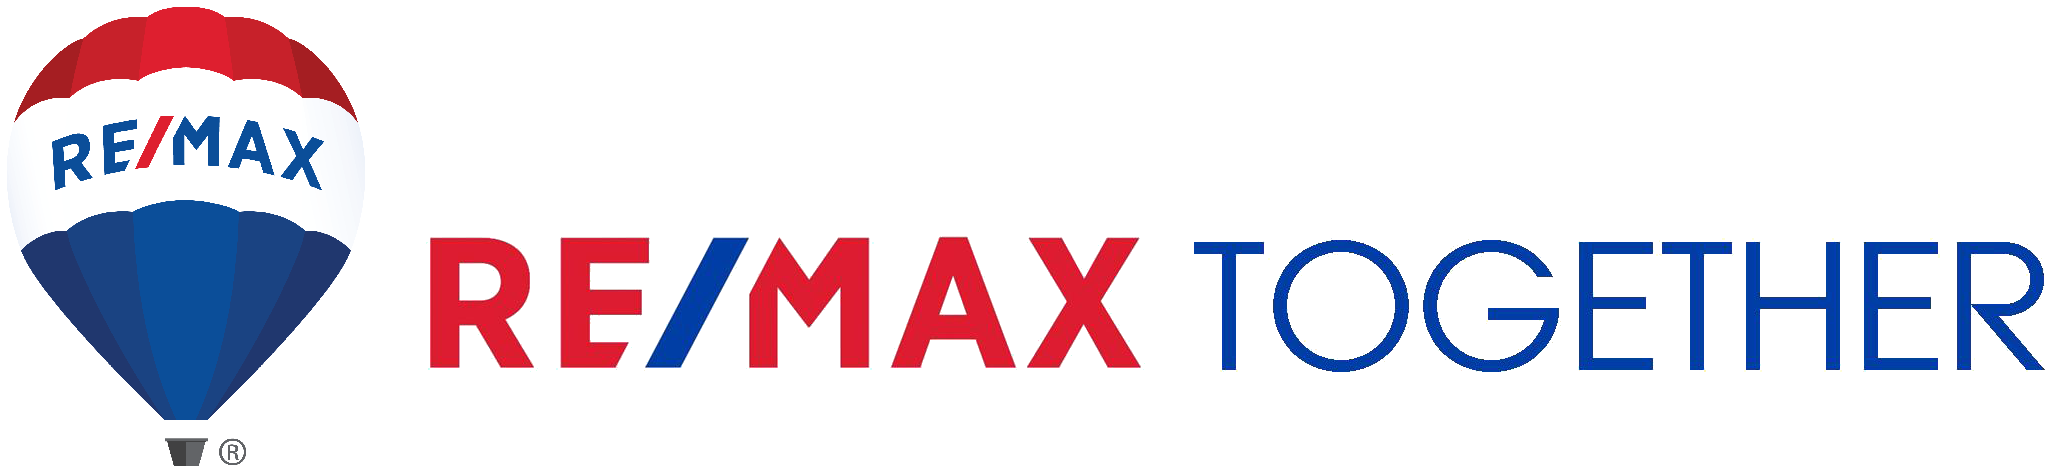 Re/max Together - Remax Logo Png (2118x493), Png Download